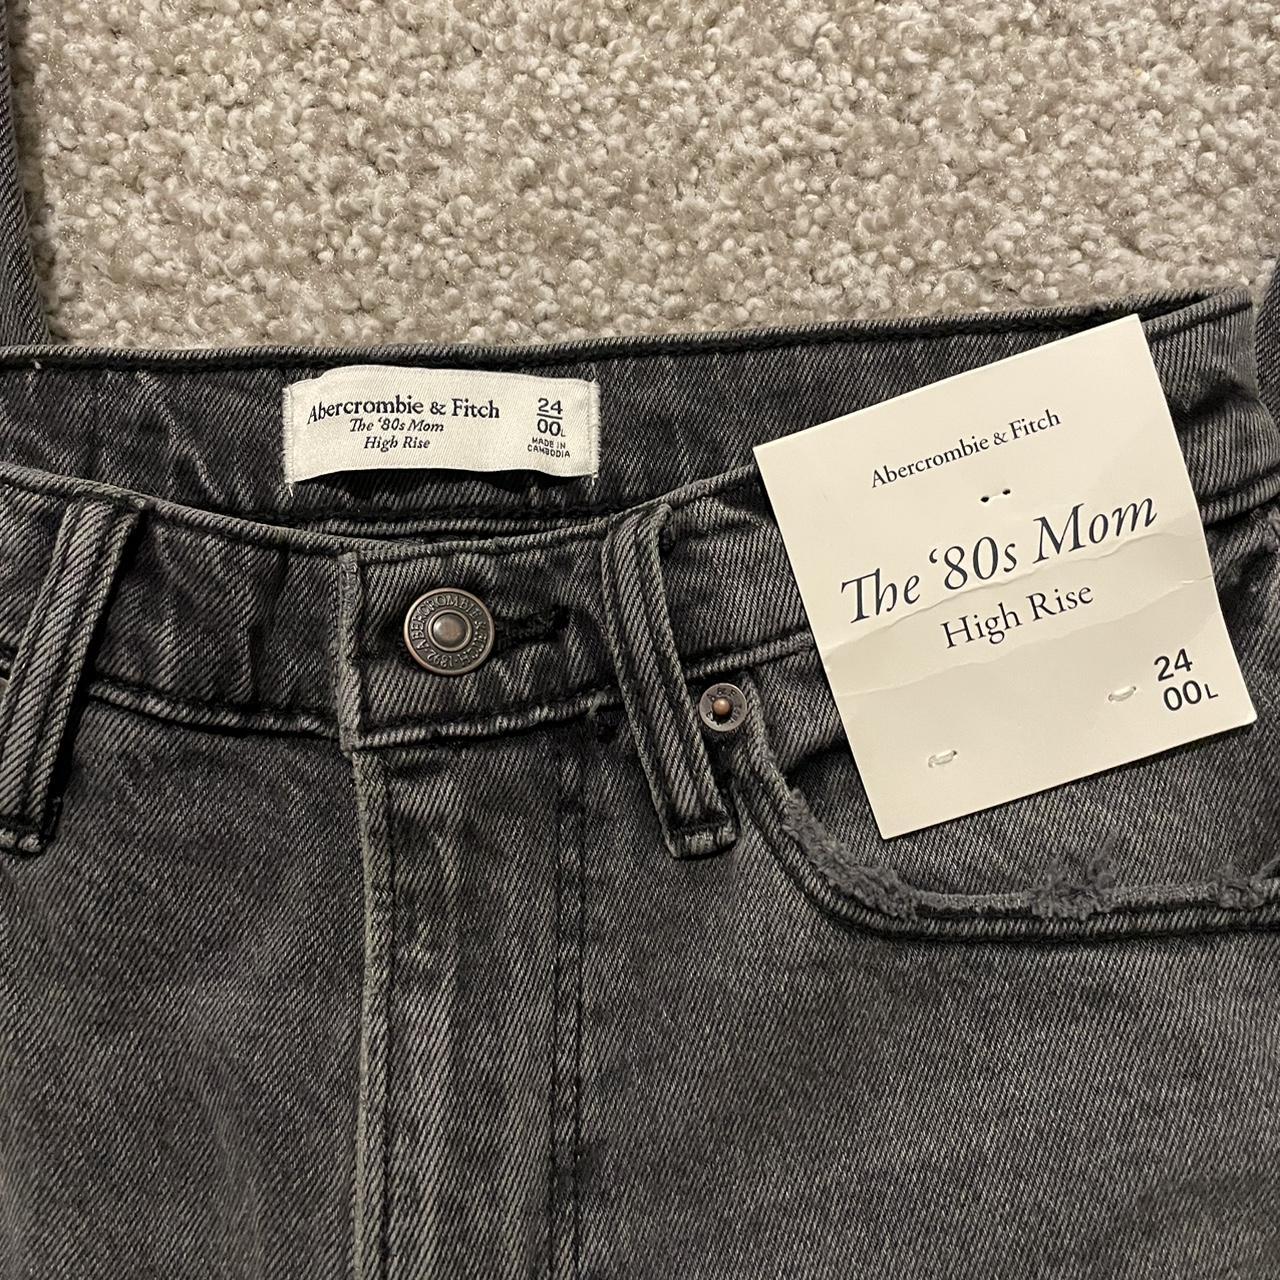 Abercrombie & Fitch Women's Grey and Black Jeans (2)